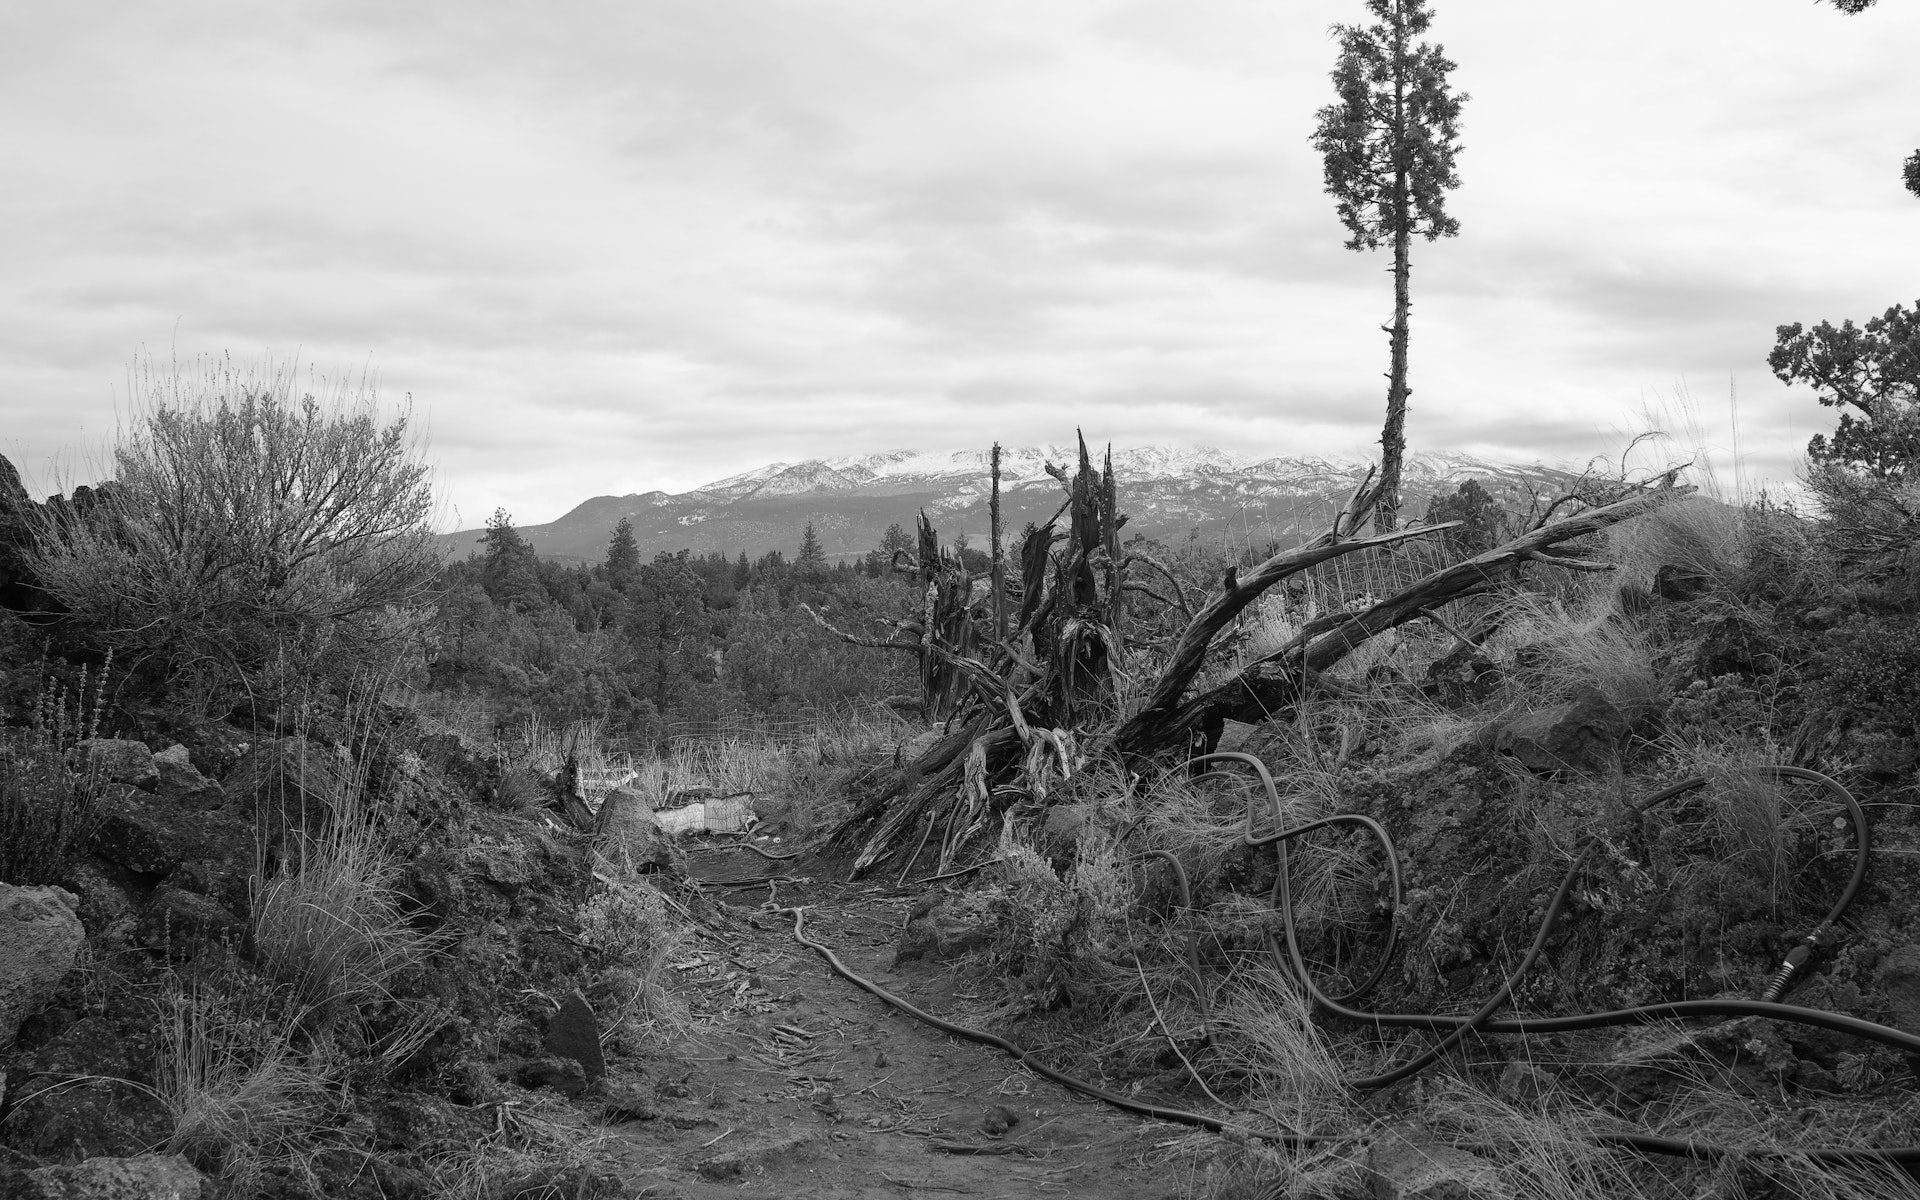 Black and white photograph of a landscape with black hoses, a mountain peak, and a tree